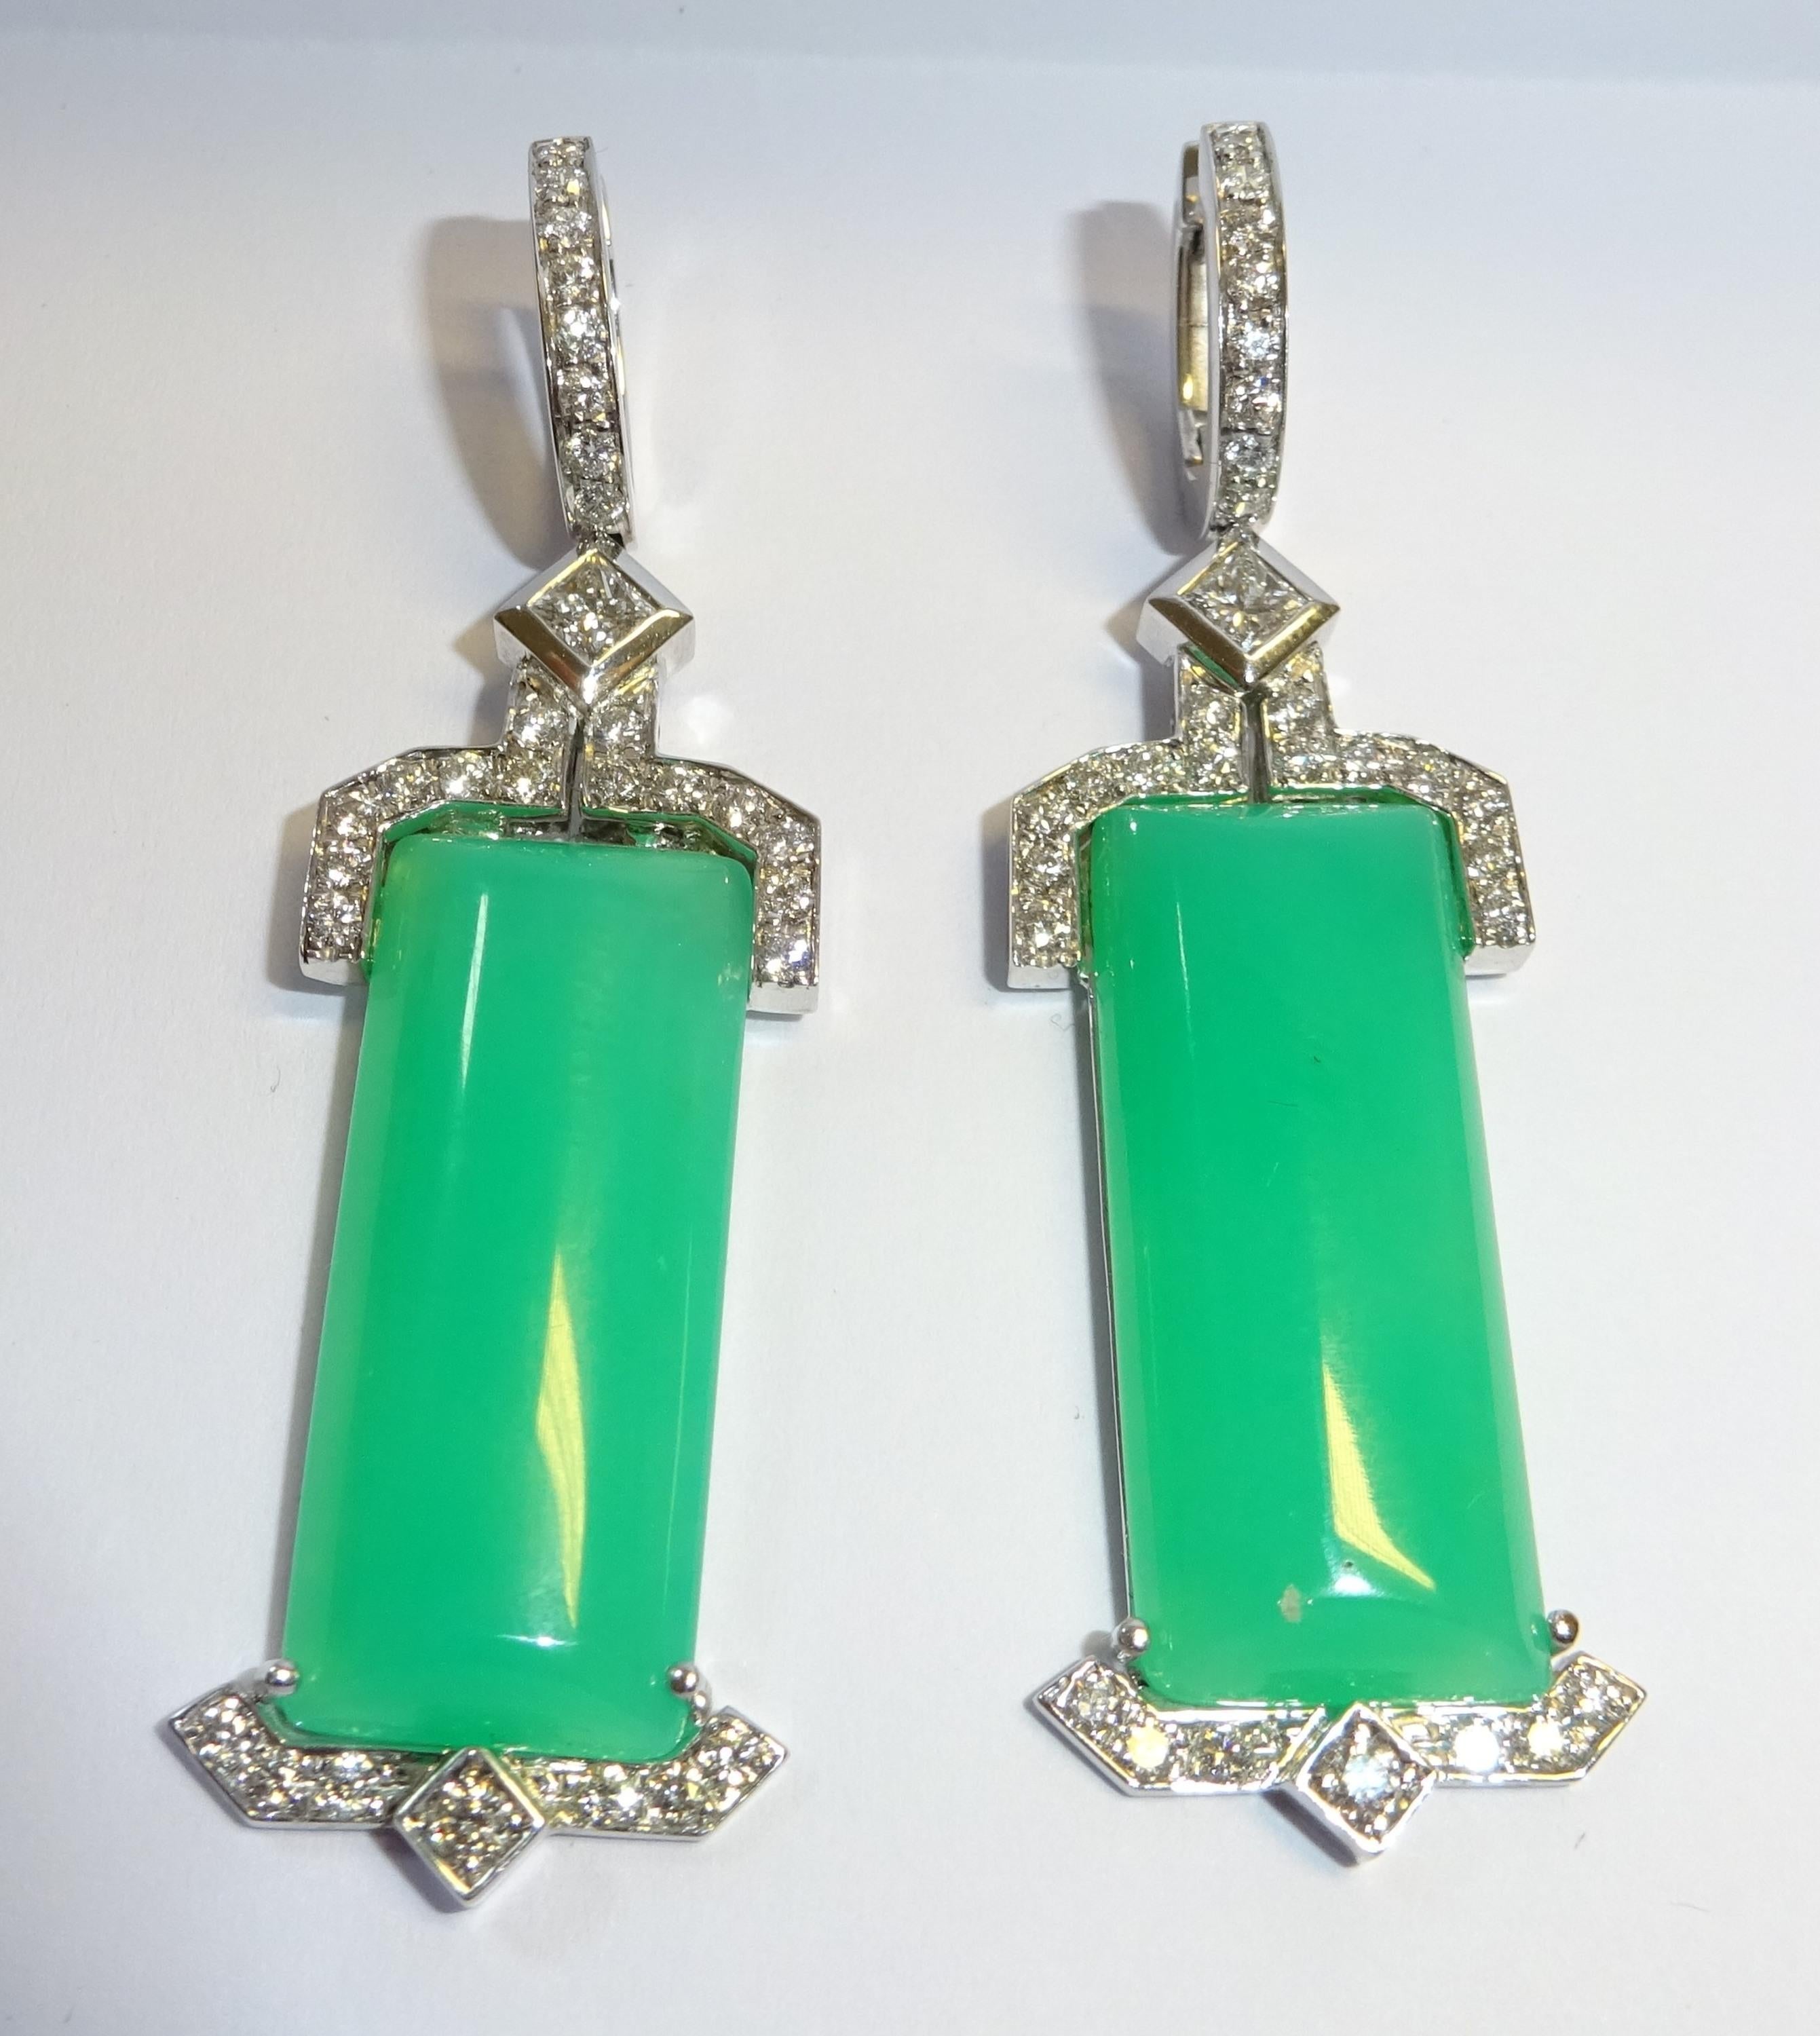 Playful and Vibrant 18 Karat Gold Earrings embedded with Diamonds and Chrysopras in Art Deco Style

52 Diamonds 0.55 ct.
2 Diam.Princess 0.35 ct.
2 Crysopras  24.27 ct.


Founded in 1974, Gianni Lazzaro is a family-owned jewelery company based out